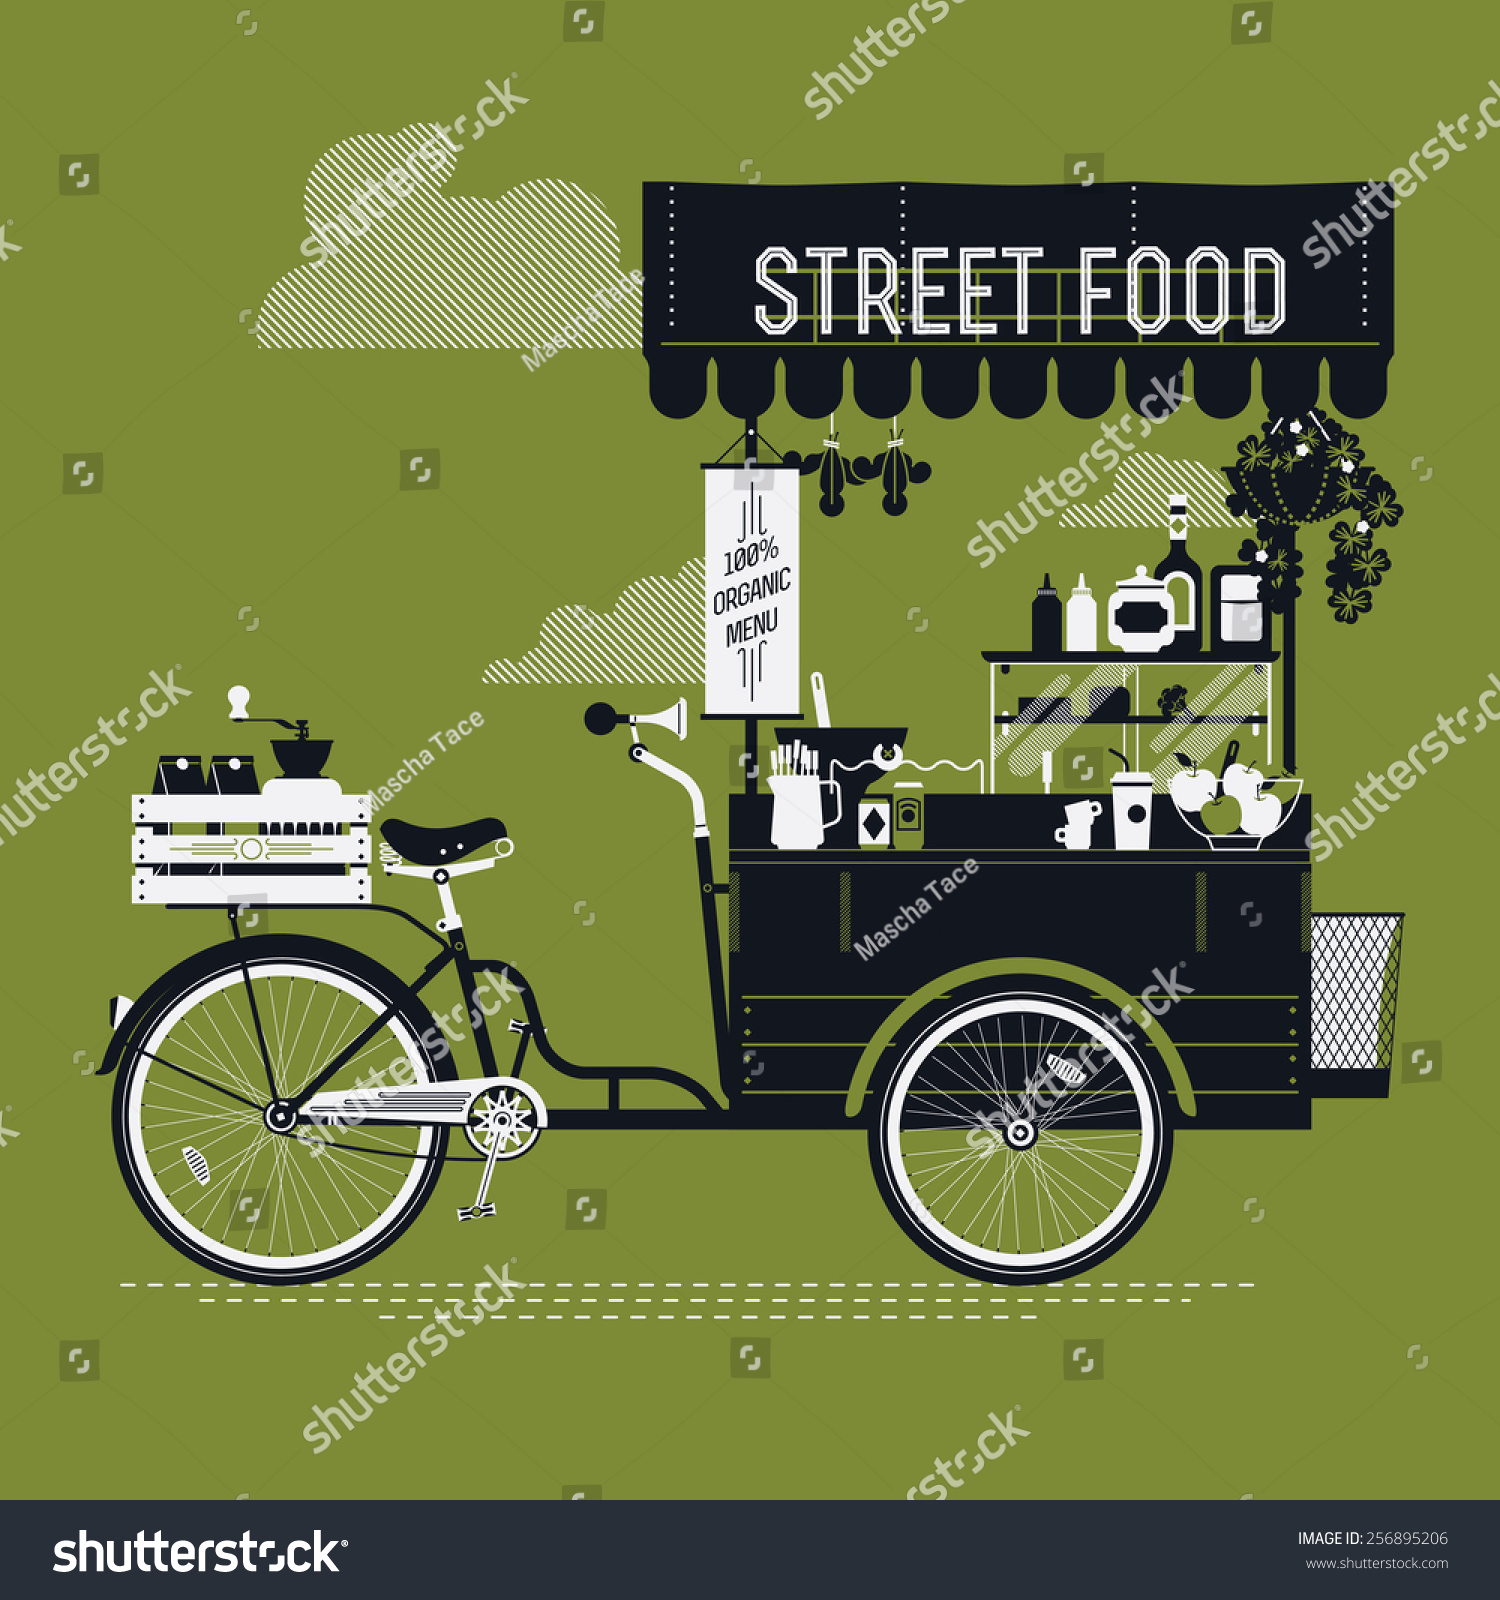 SVG of Creative vector detailed graphic design on street food with retro looking vending bicycle cart with awning, refreshments, bowls, bottles, wooden crate on rear rack and more | Mobile cafe illustration svg